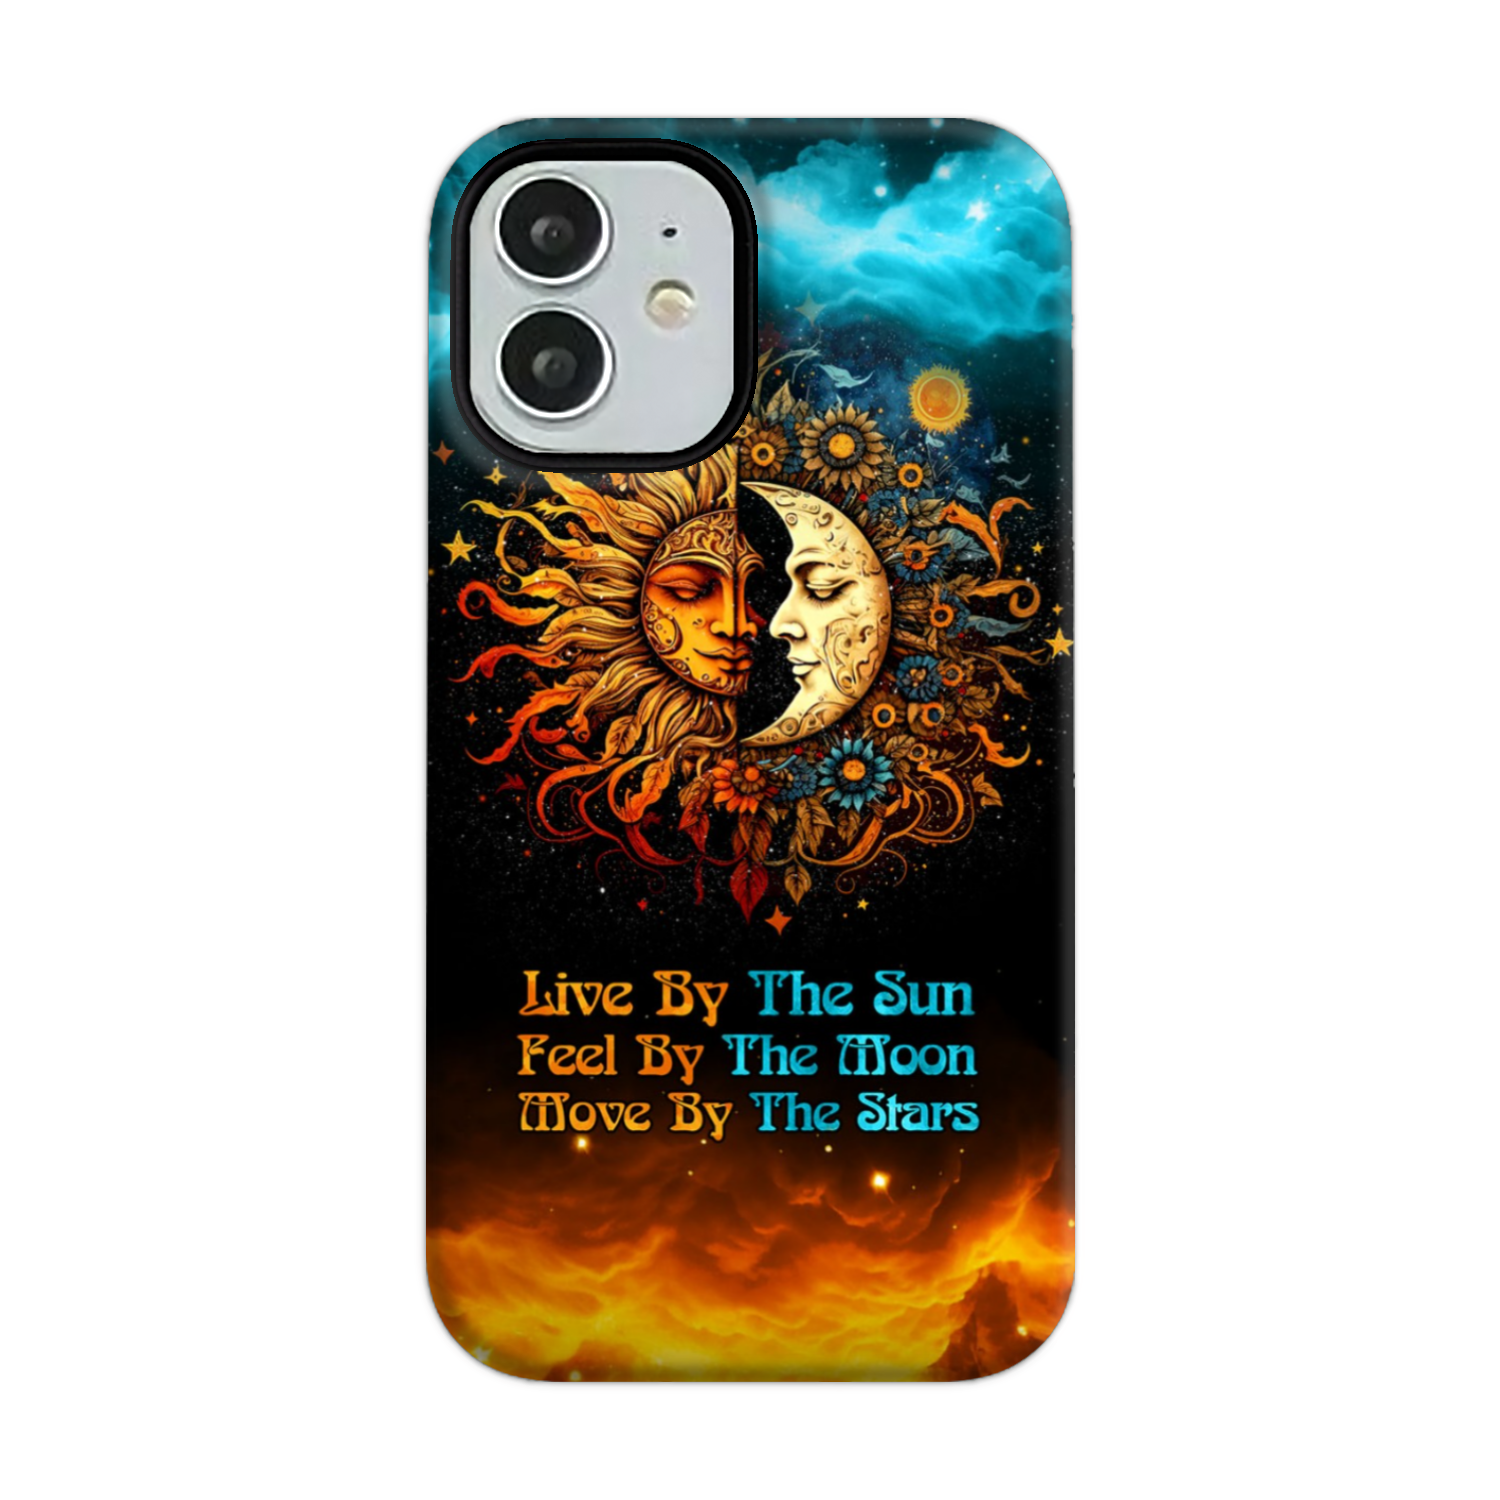 LIVE BY THE SUN PHONE CASE - TYTM2702231